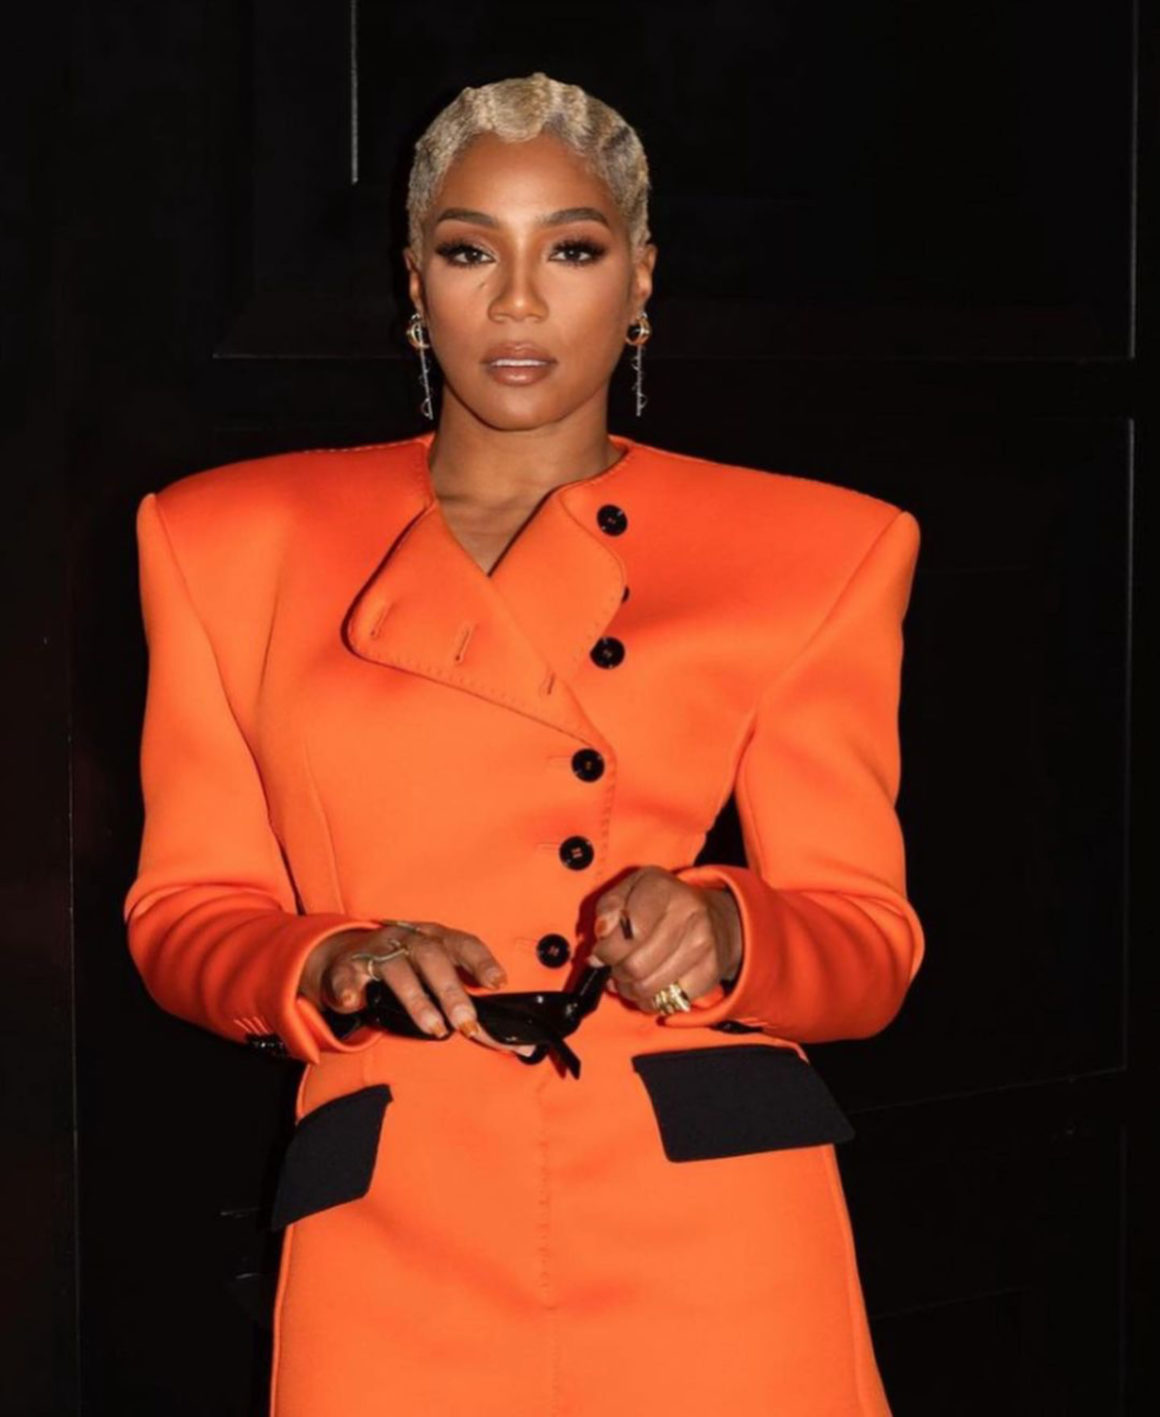 Tiffany Haddish attends Grammys Afterparty in Custom Orange and Black Dolce  Gabbana Dress